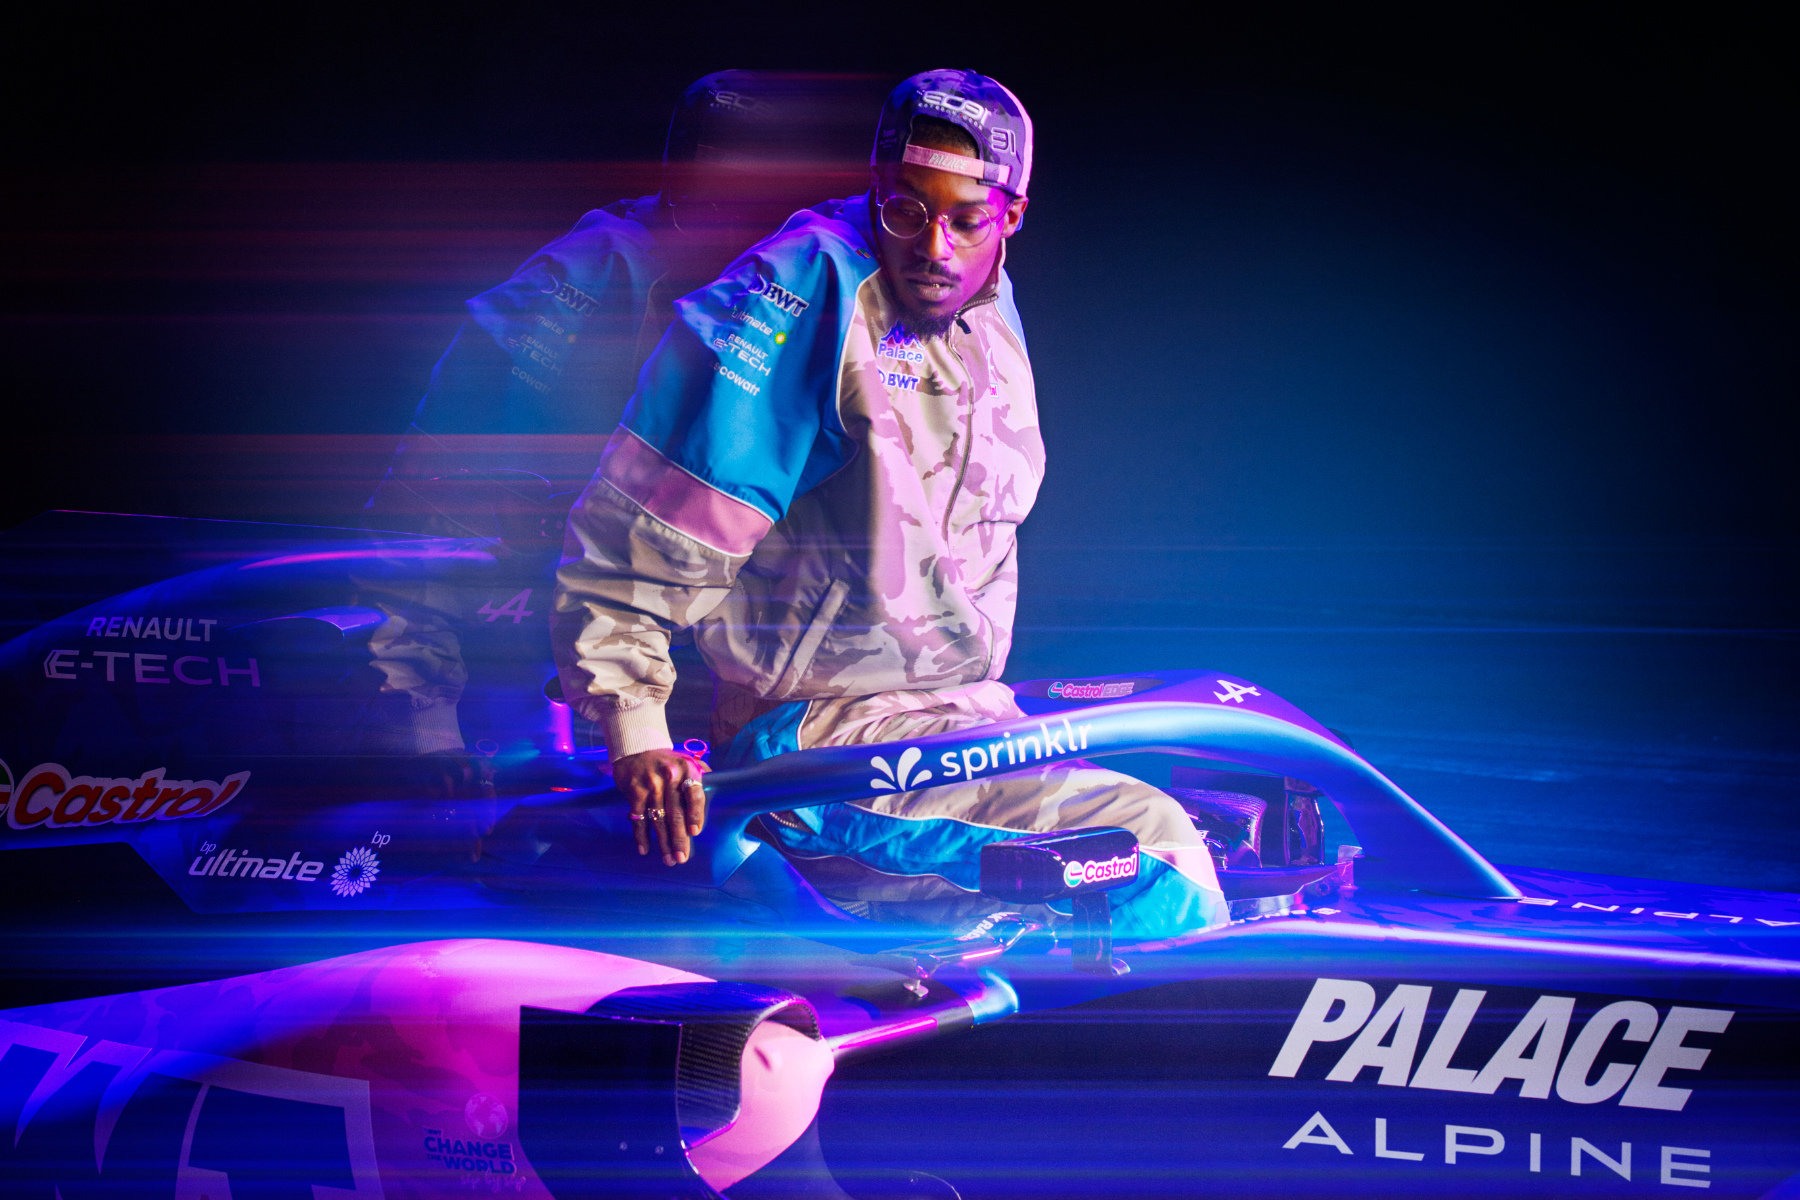 Palace & Kappa designed a race-ready collection for F1's Alpine ahead of the Las Vegas Grand Prix on November 19.